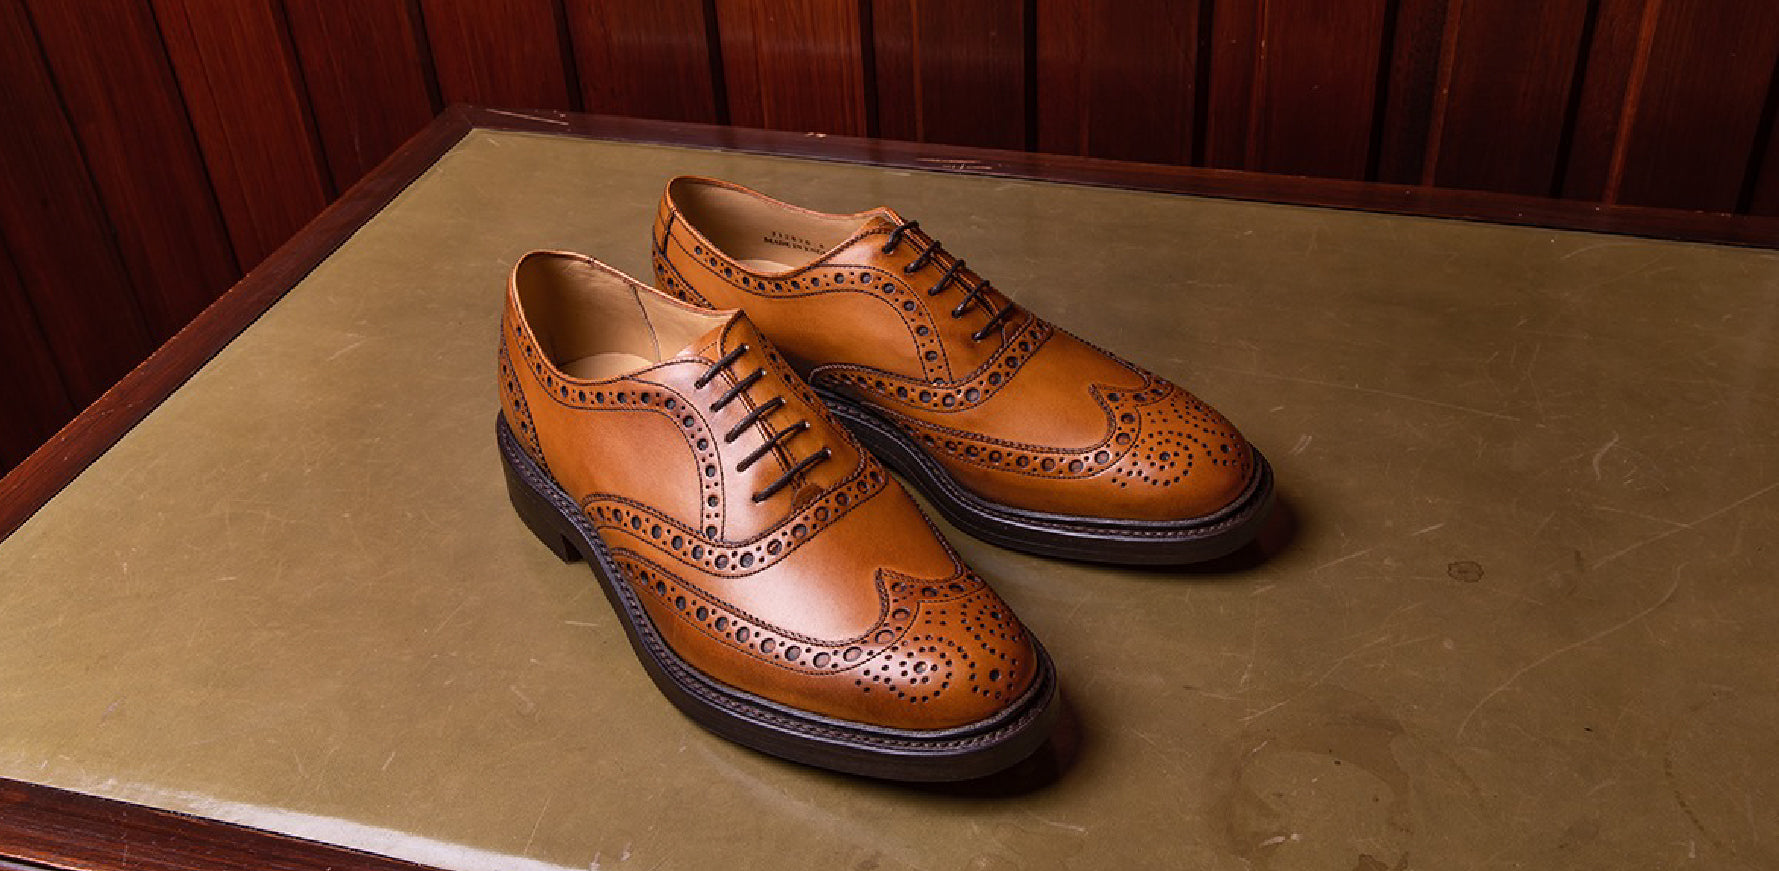 Westfield - Men's Leather Brogues By Barker